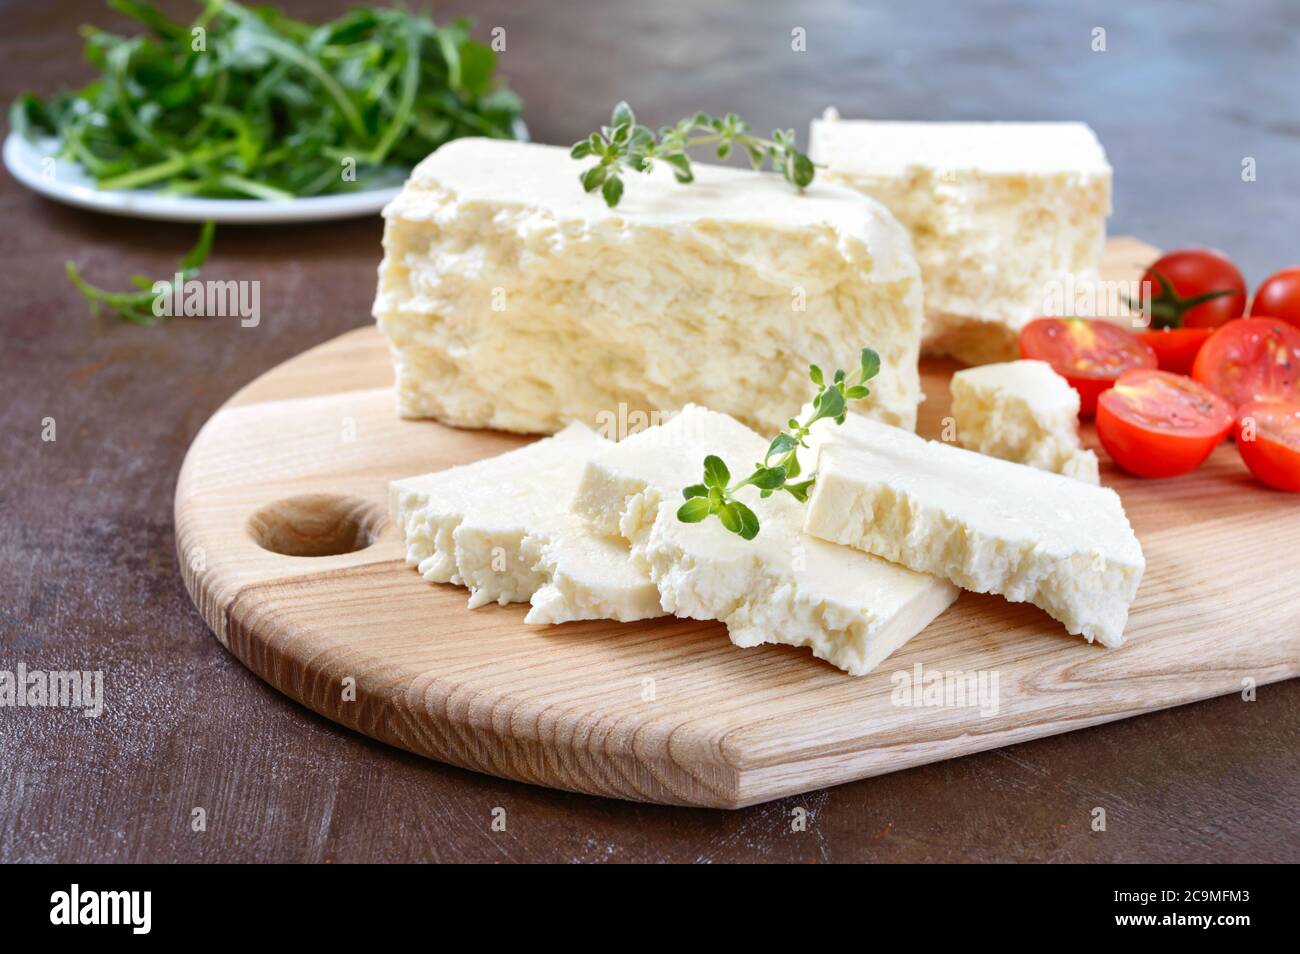 Delicious healthy sheep or goat feta cheese. Chunks of cheese on a wooden board. Stock Photo